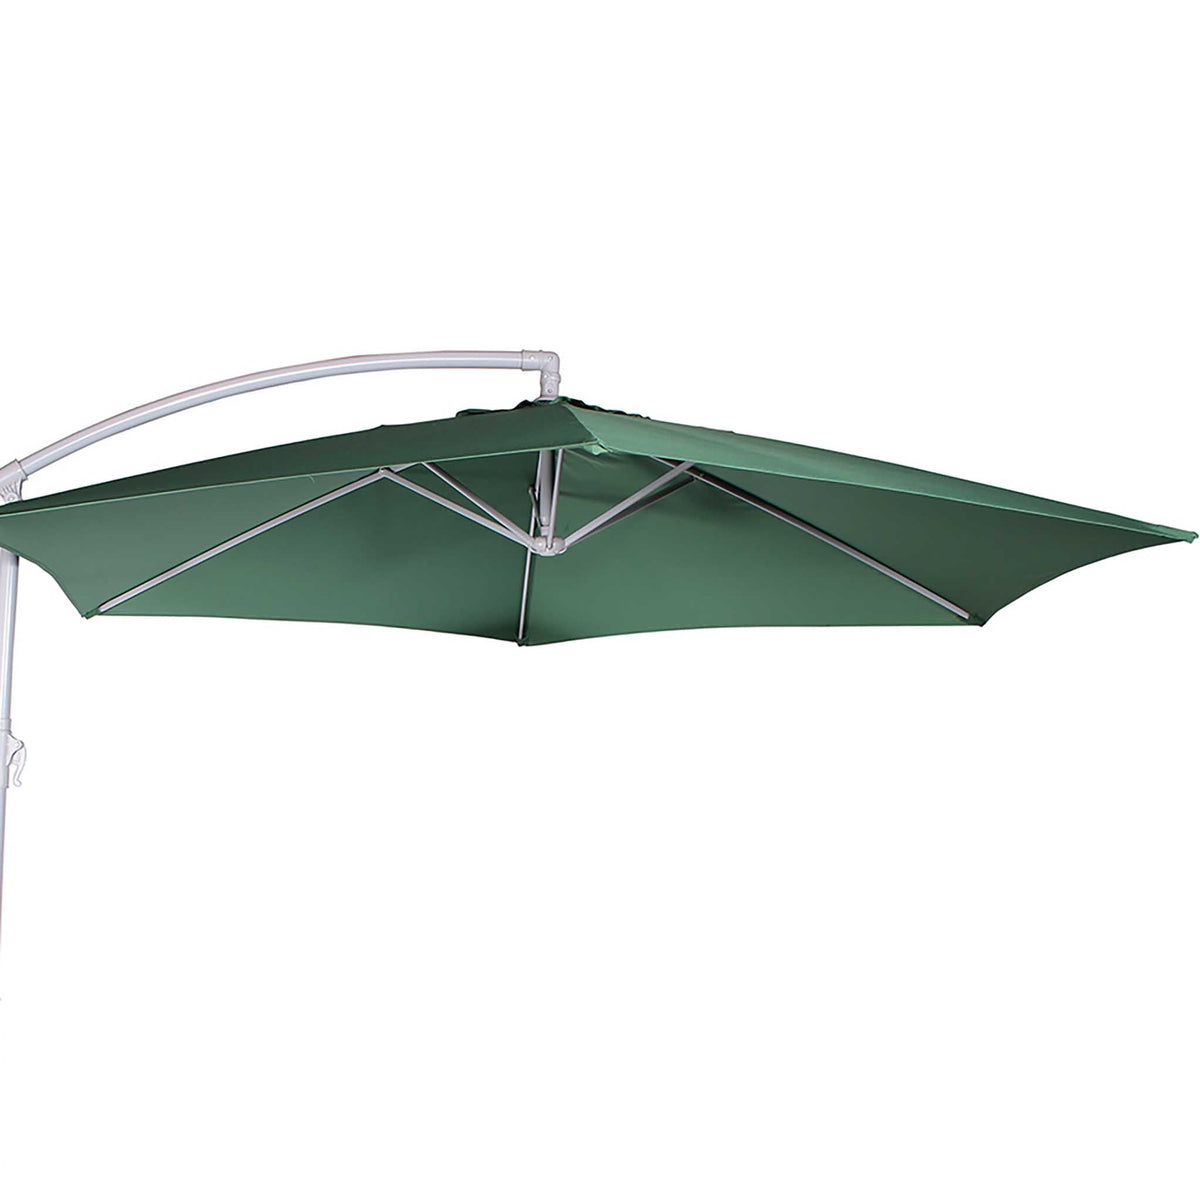 3m Cantilever Parasol in Green - Close up of canopy